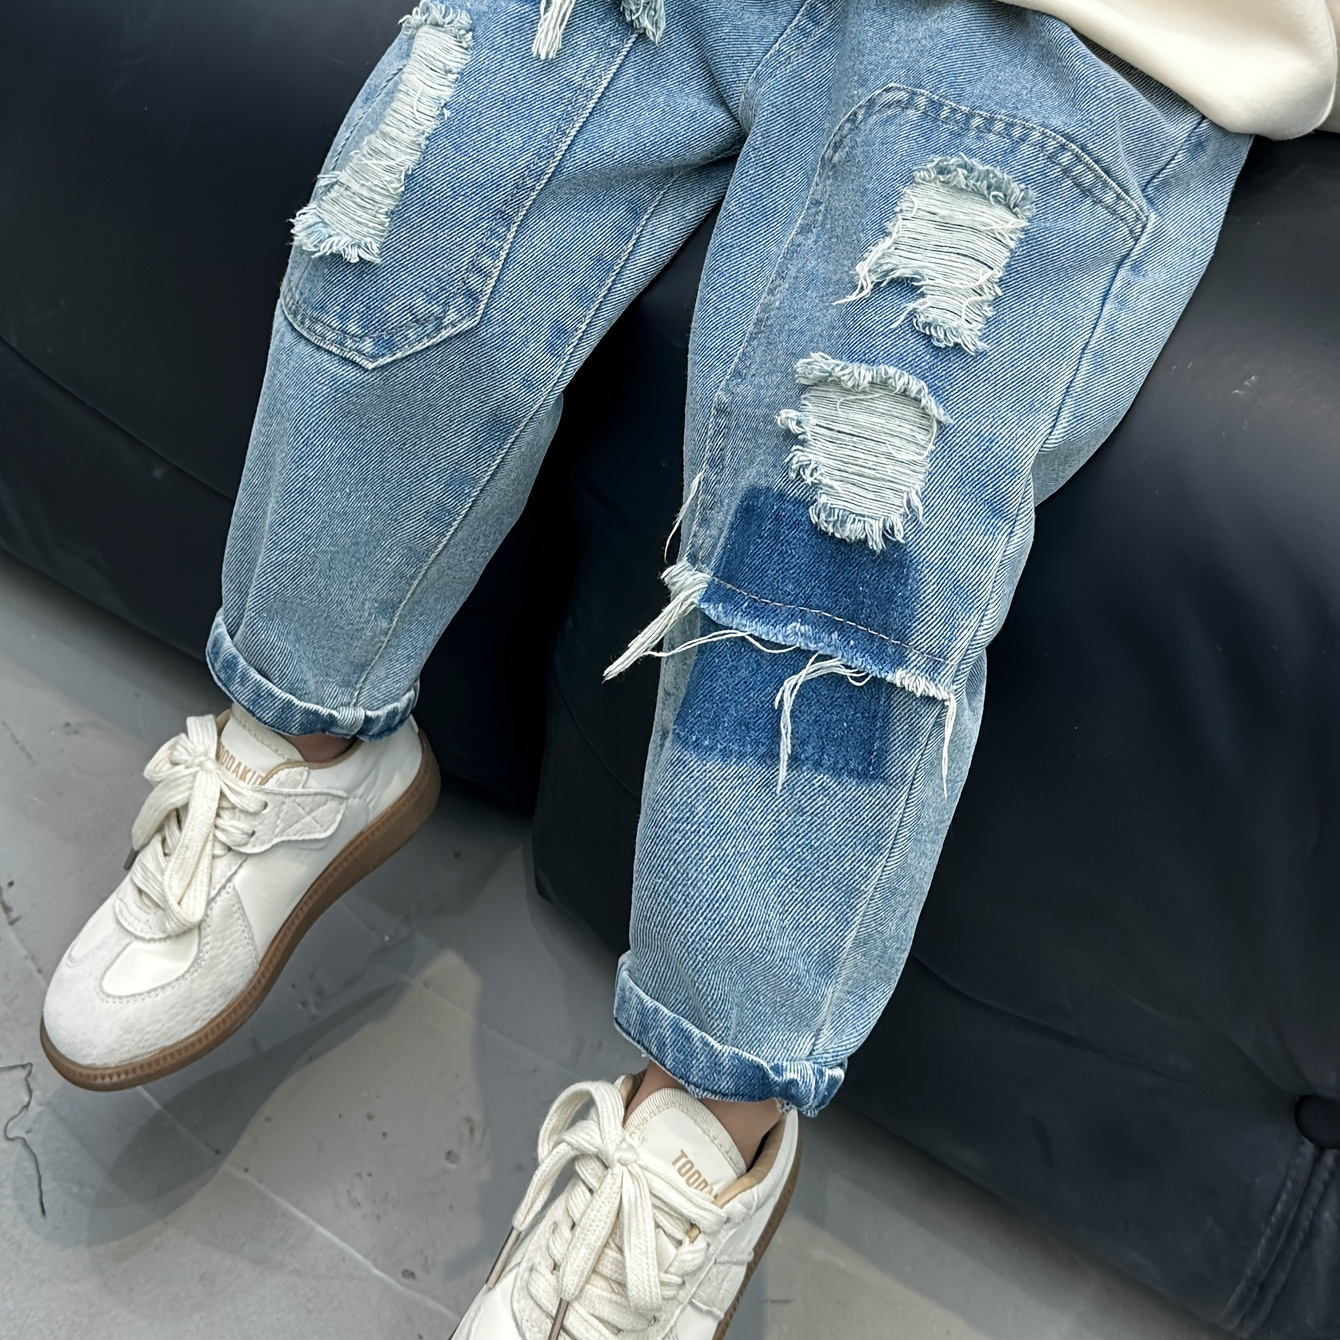 

Boys' Fashion Ripped Patchwork Cotton Jeans - Casual Loose Fit Denim Pants For Spring/summer/autumn, Kids' Stylish Distressed Trousers With Trendy Hole Details